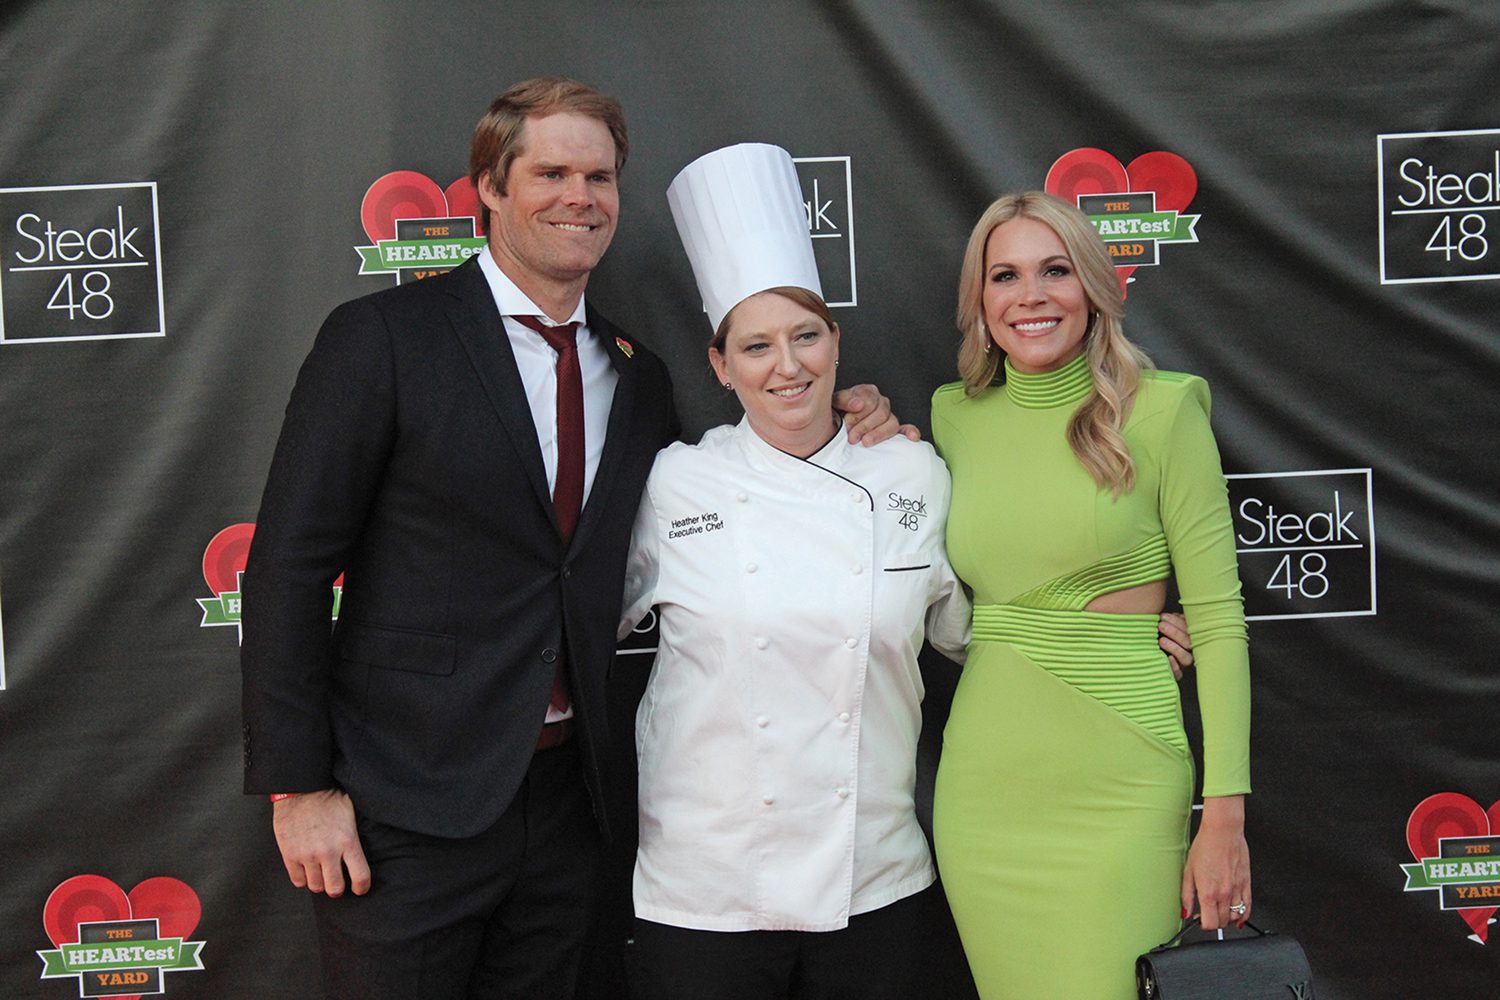 Greg and Kara Olsen with Steak 48 executive chef Heather King at the Heartest Yard fundraiser in Charlotte.